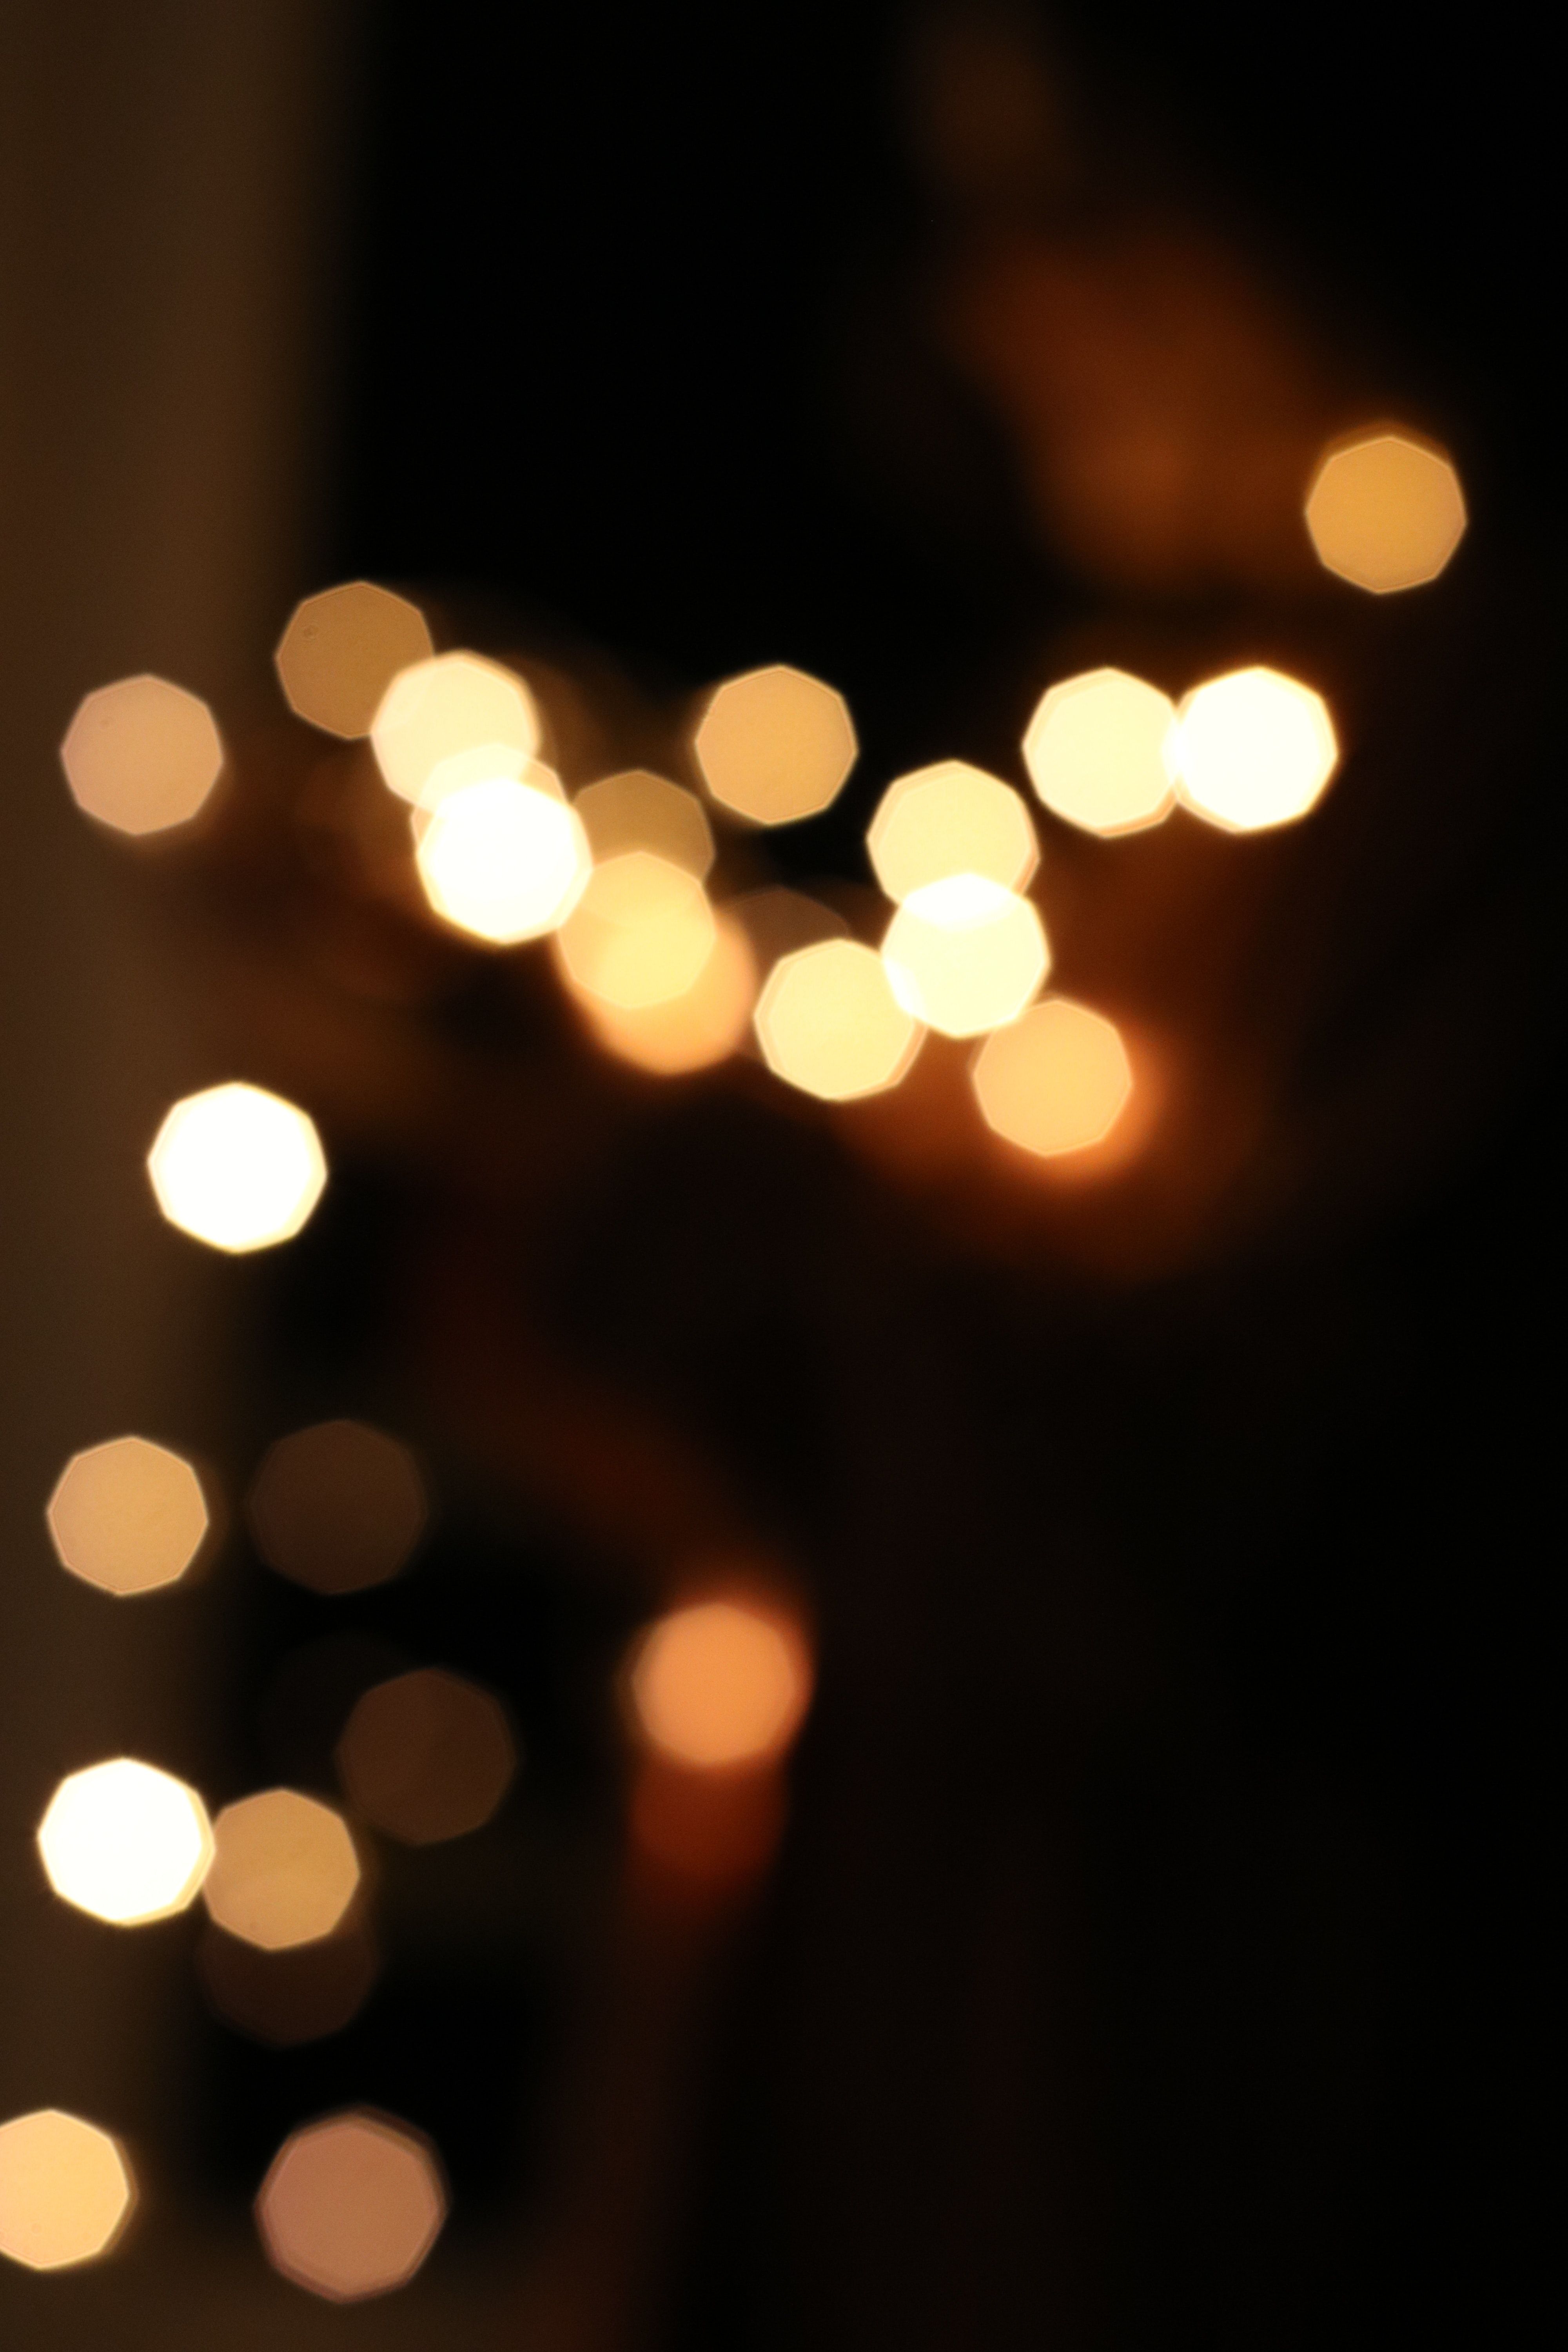 Out of Focus Photo of Lights in Bokeh Photography · Free